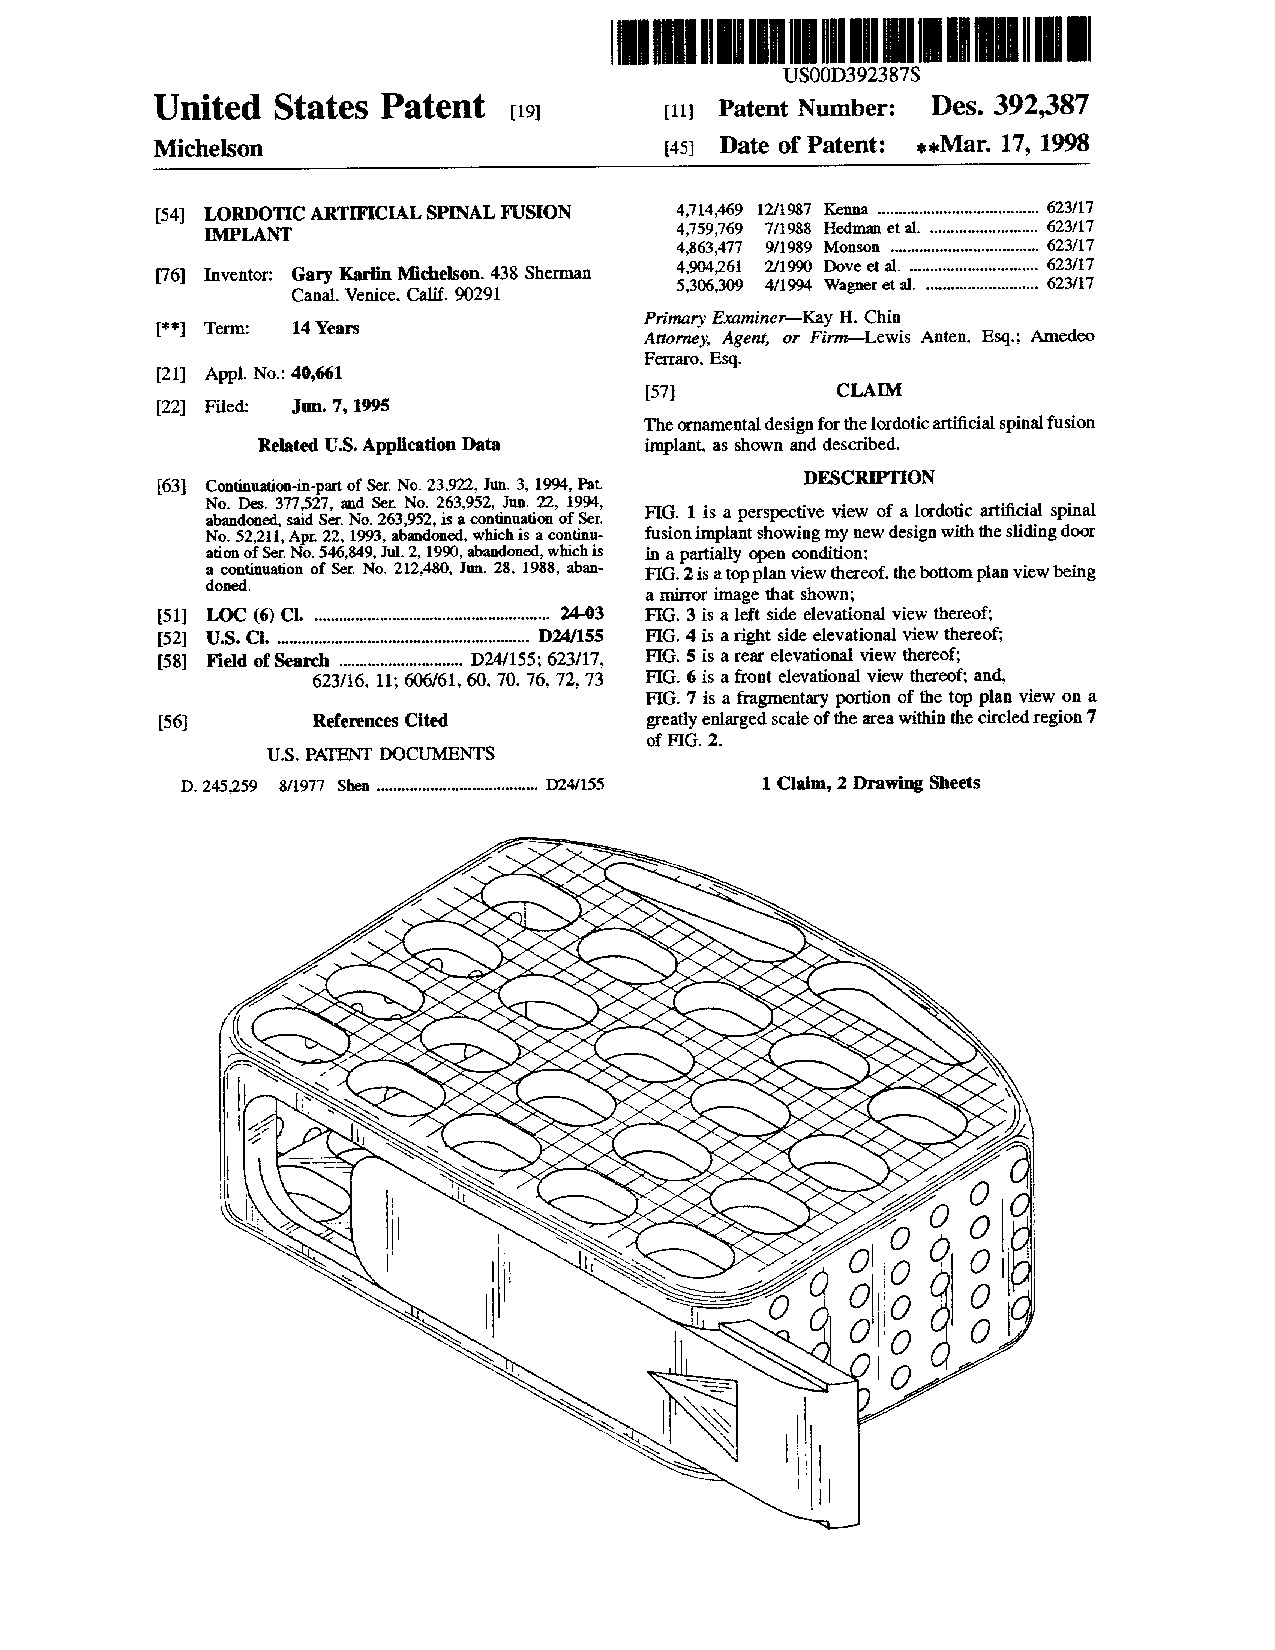 Lordotic artificial spinal fusion implant - Patent D392,387